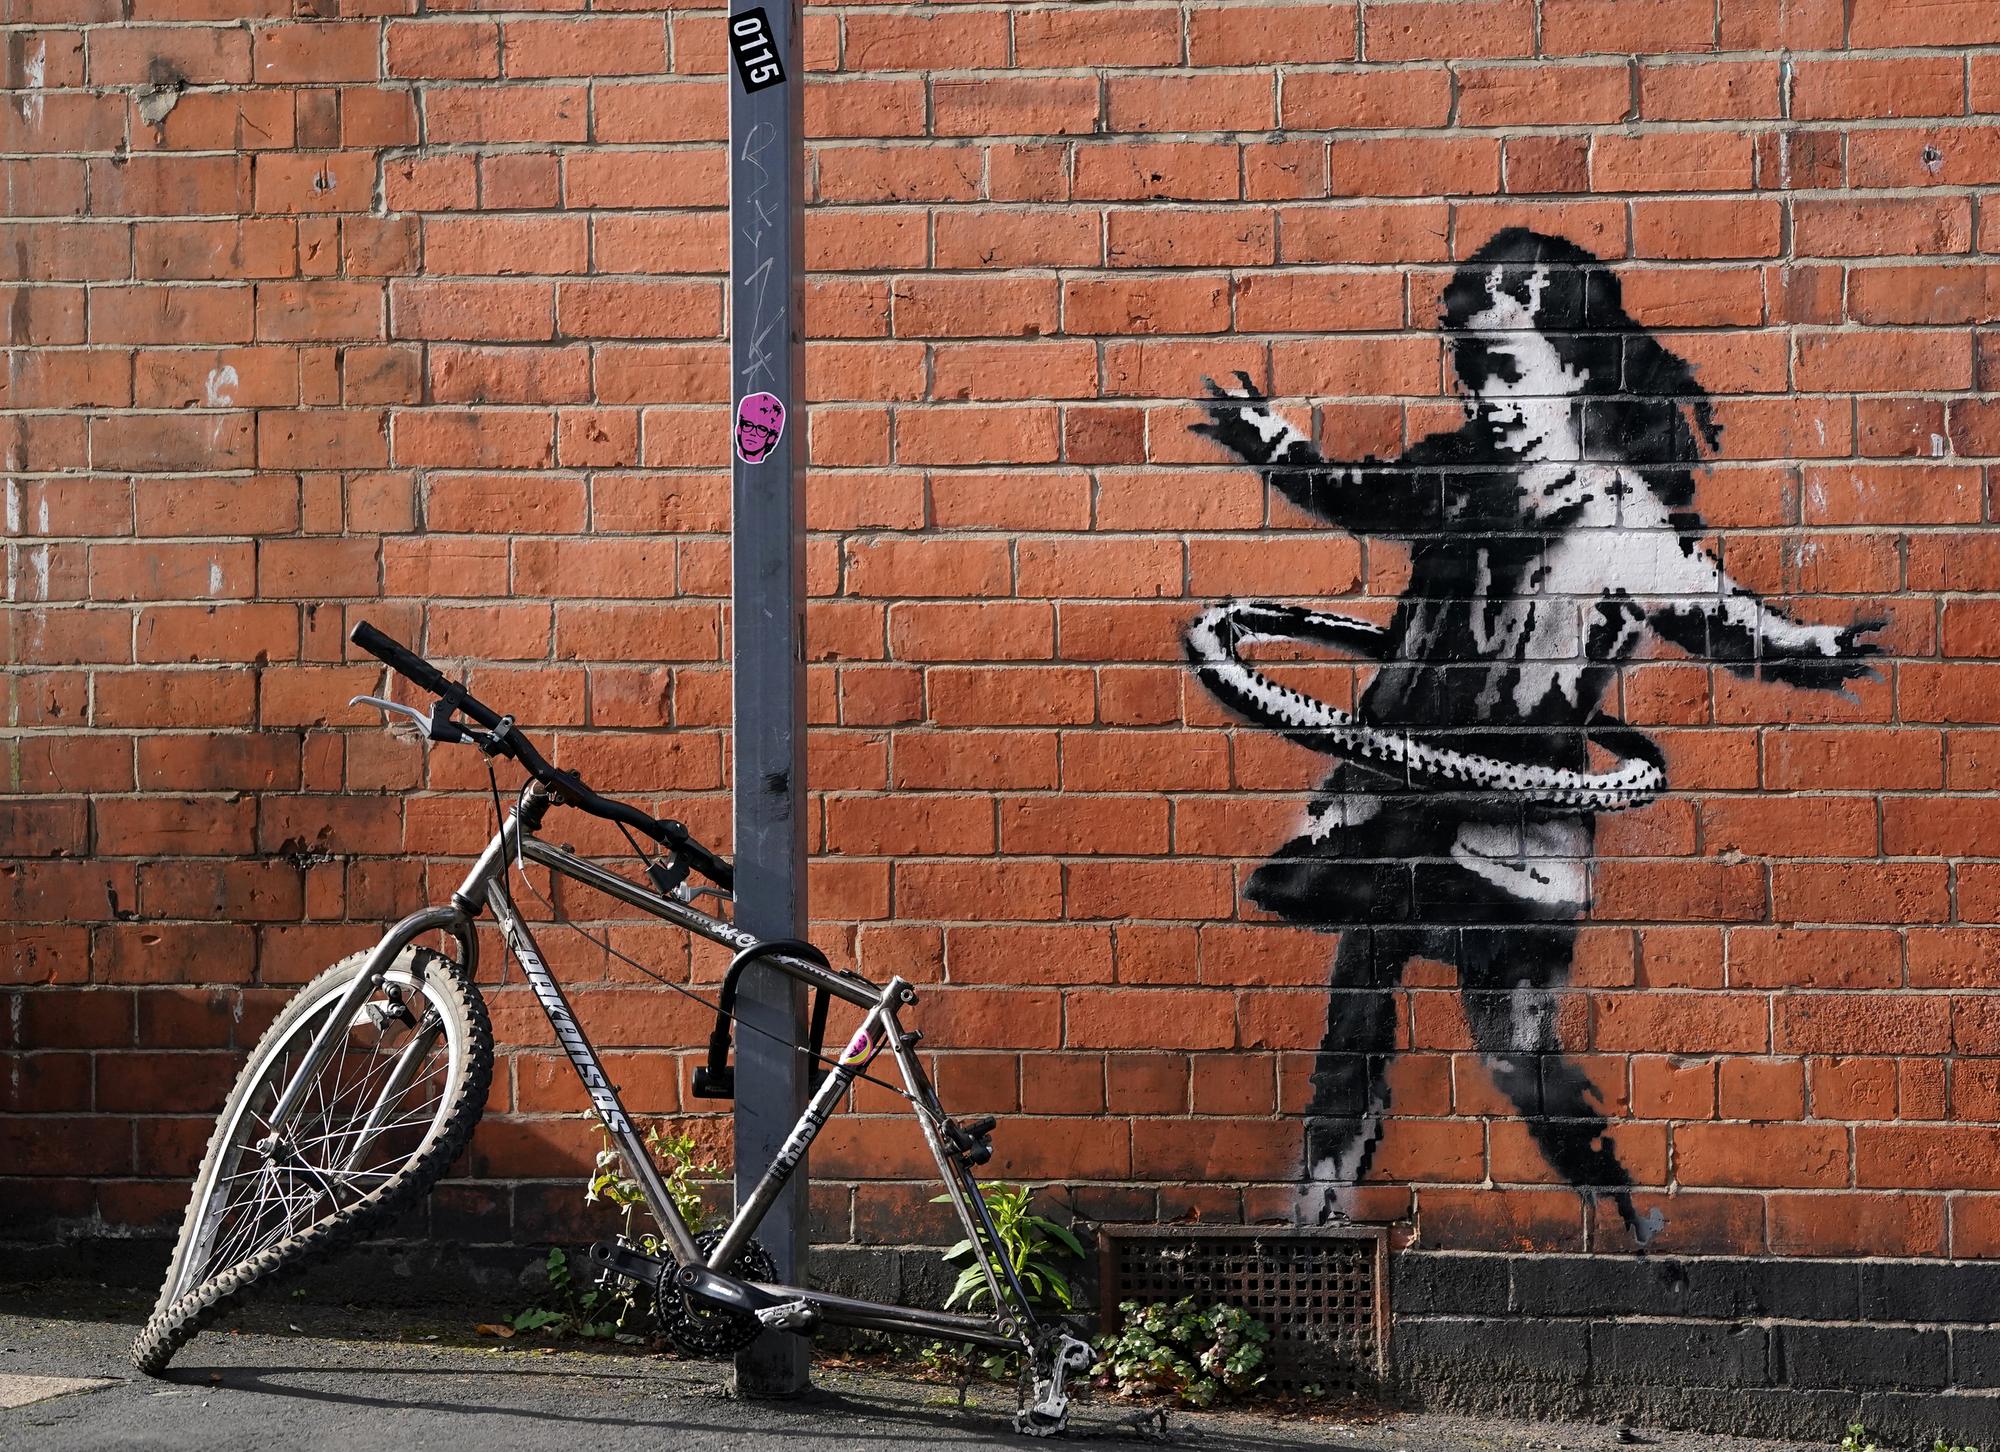 New Banksy Artwork What Is The Nottingham Street Art Of And Is It Real The Scotsman